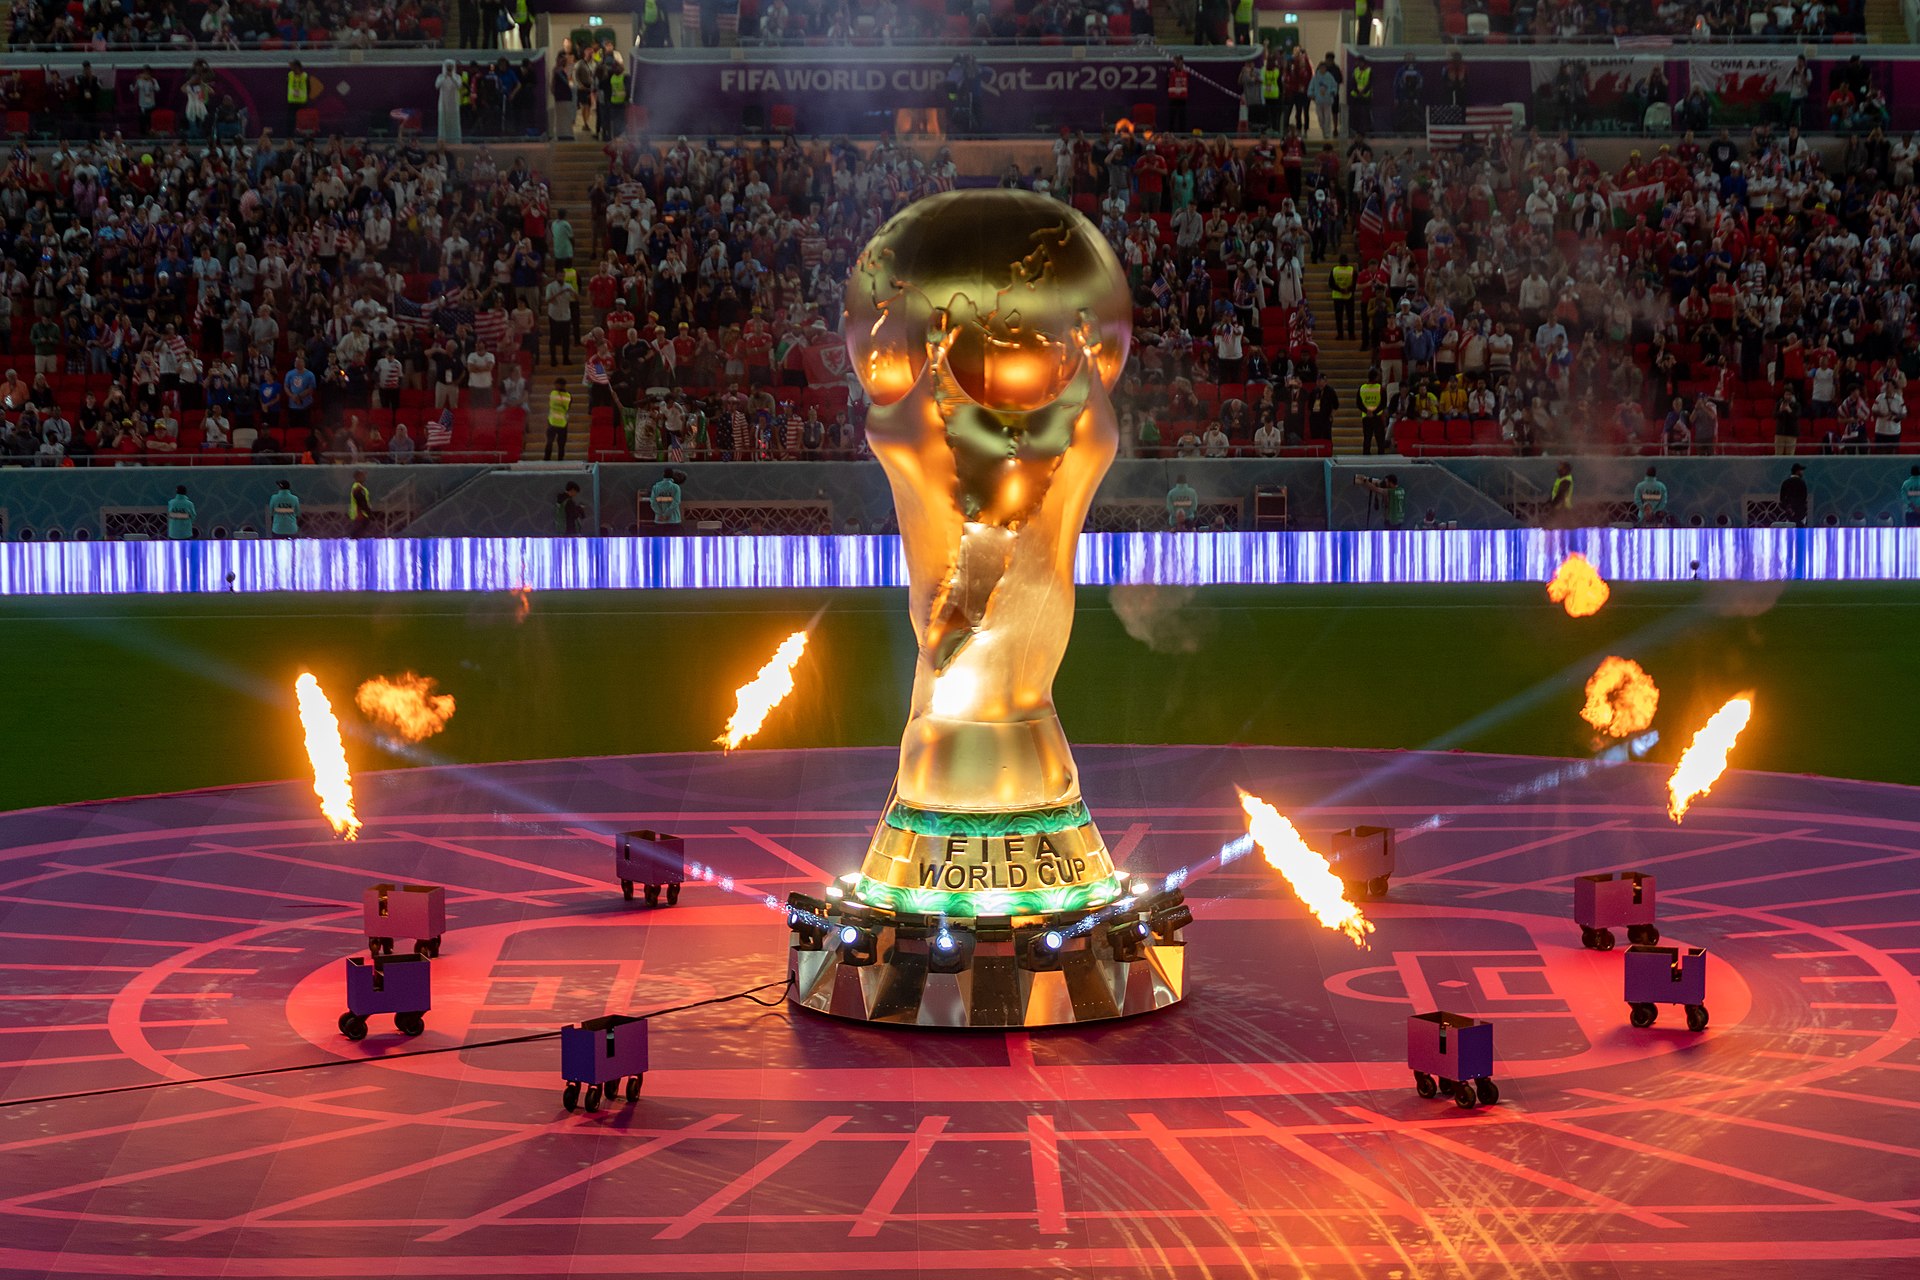 FIFA World Cup: Was it worth it?